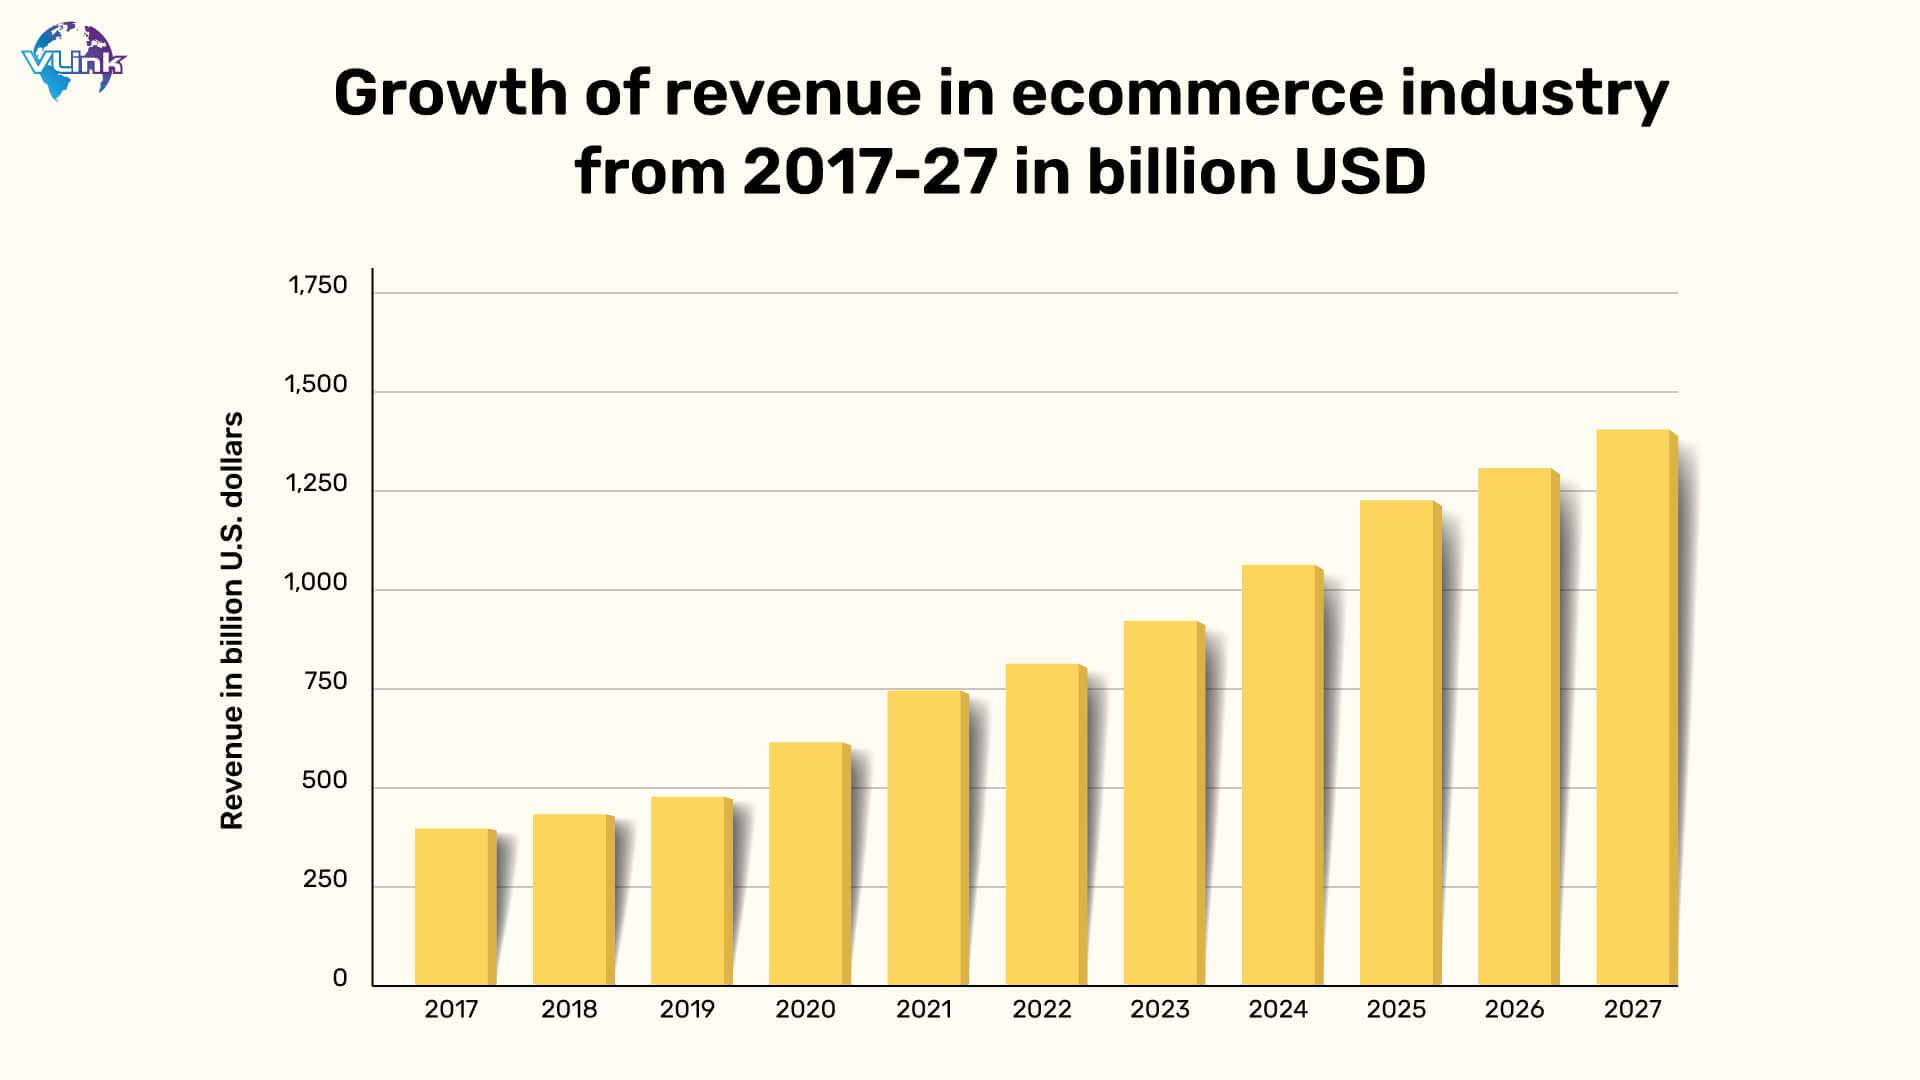 Growth of revenue in ecommerce industry from 2017-27 in billion USD